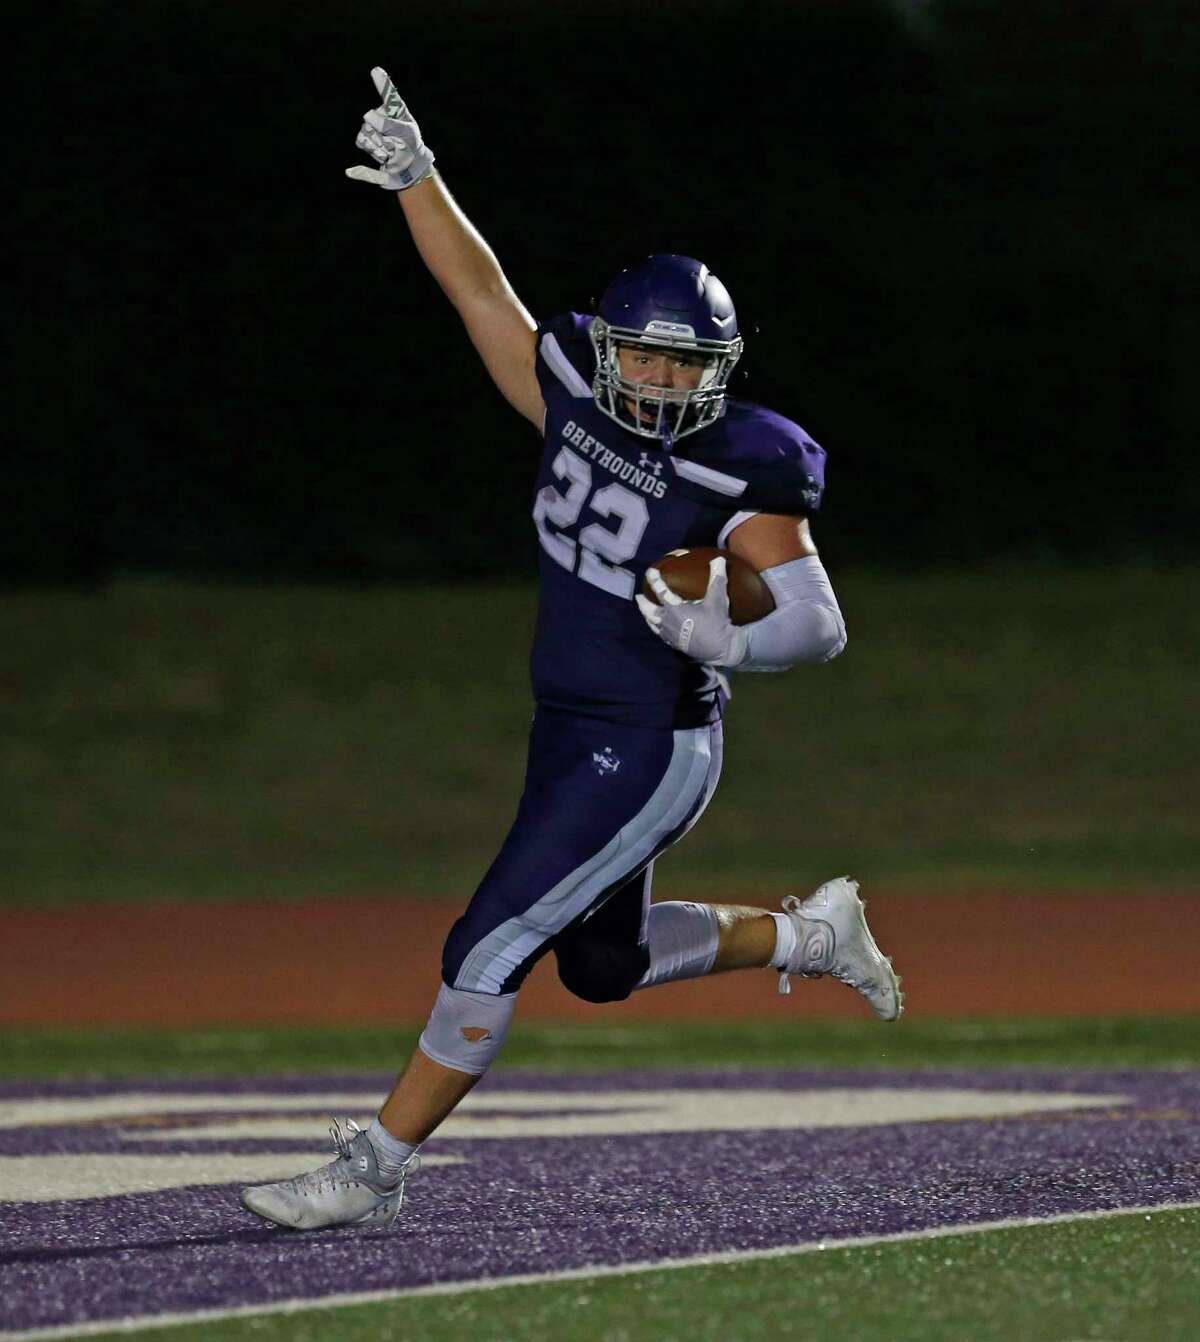 Boerne Hutson Hendrix (22) returns a fumble for a touchdown against Corpus Christi Flour Bluff on Thursday, Aug. 25, 2022 at BISD Stadium, Boerne defeated Corpus Christi Flour Bluff 35-32.